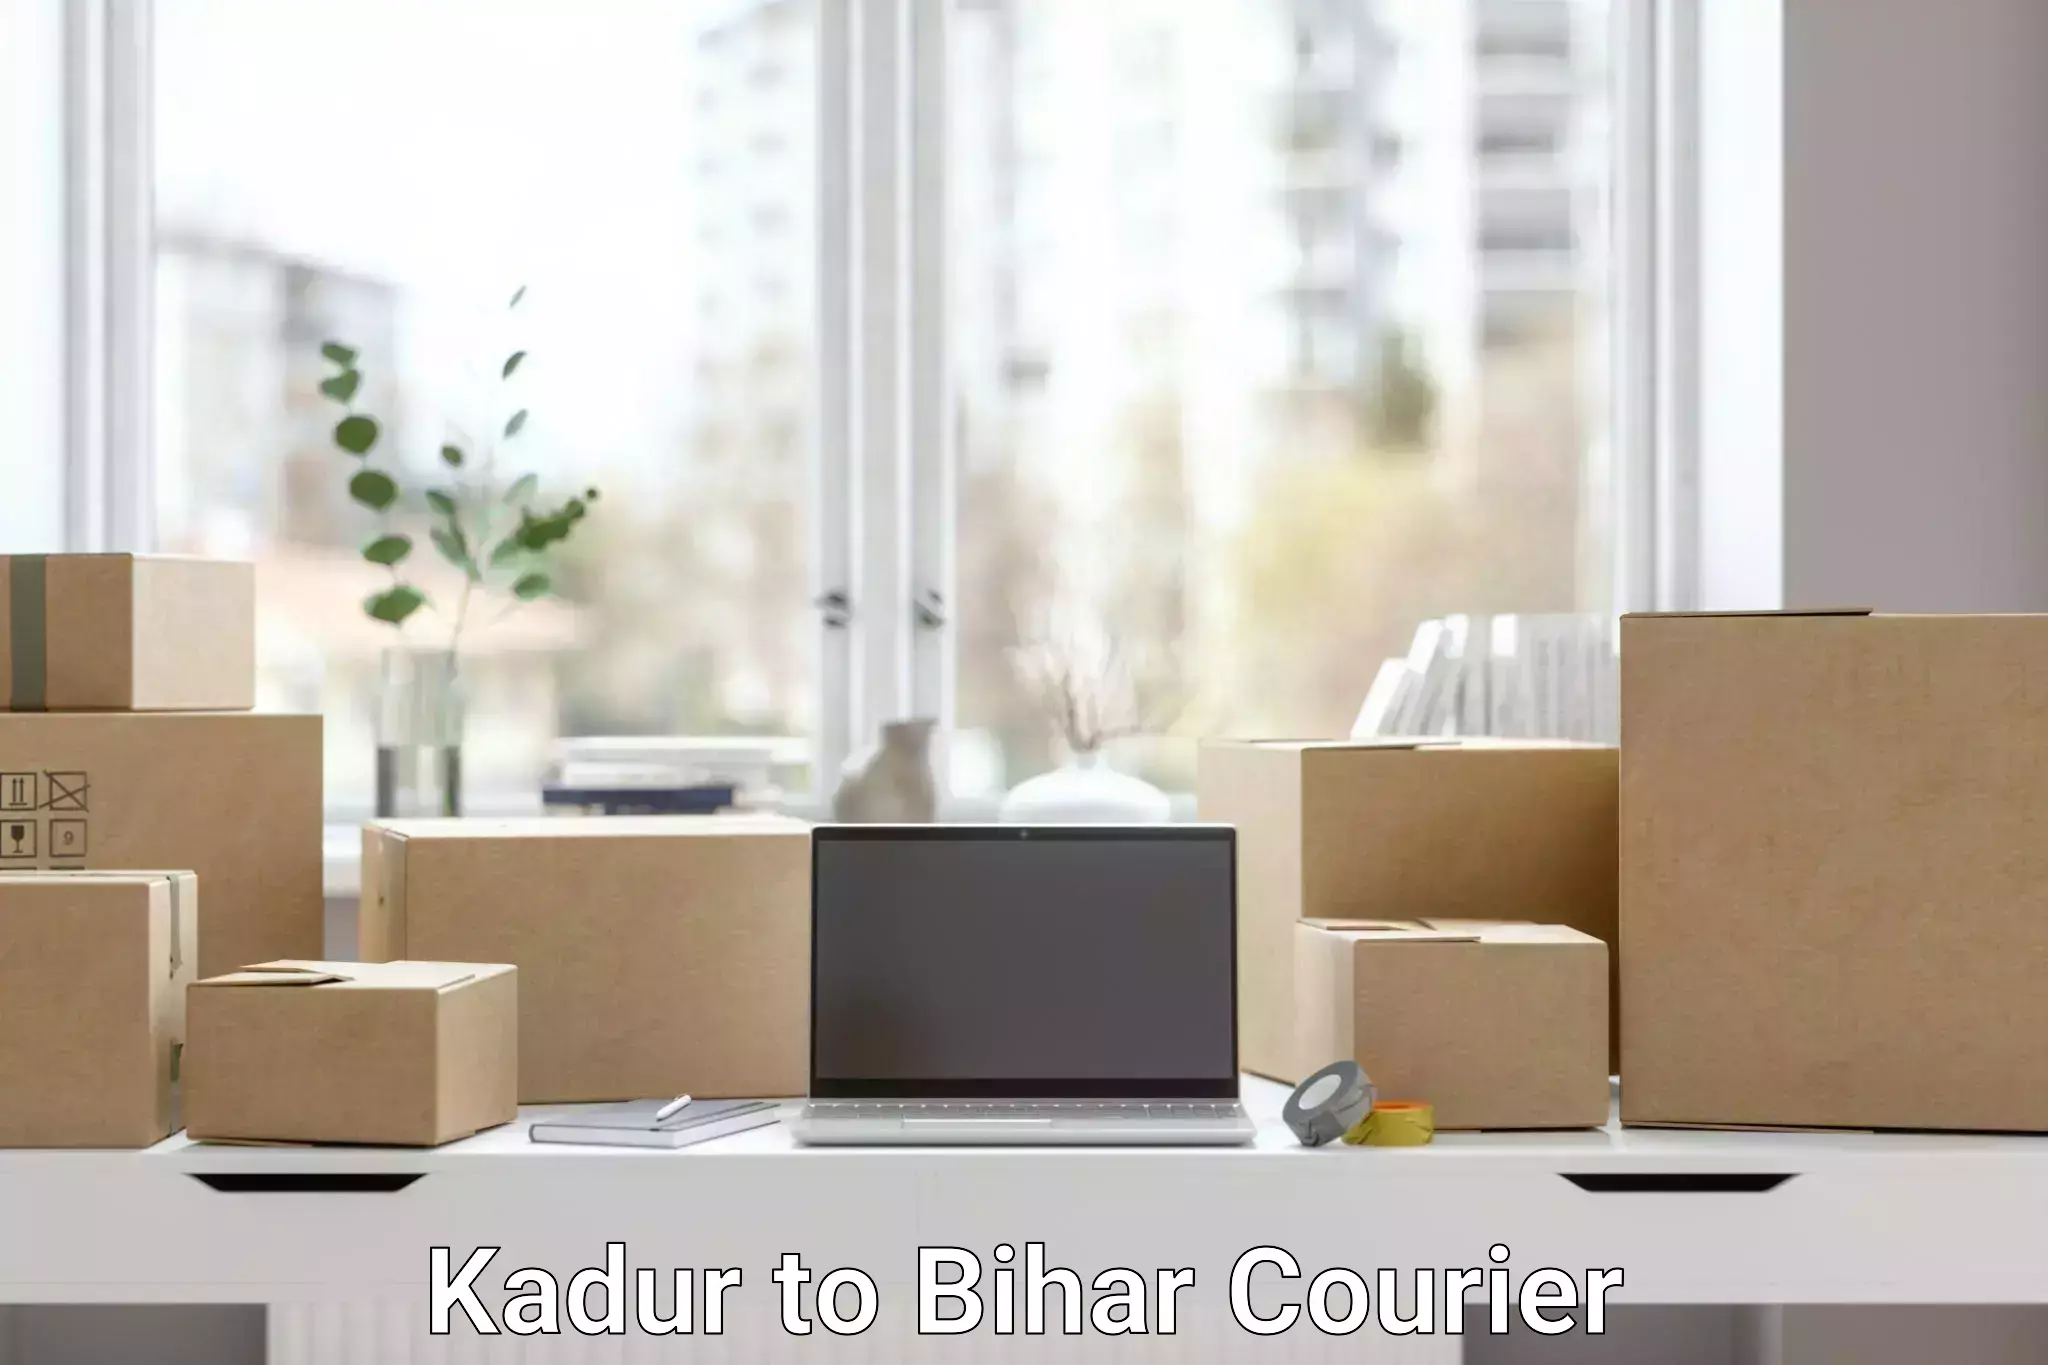 24-hour delivery options in Kadur to Bihar